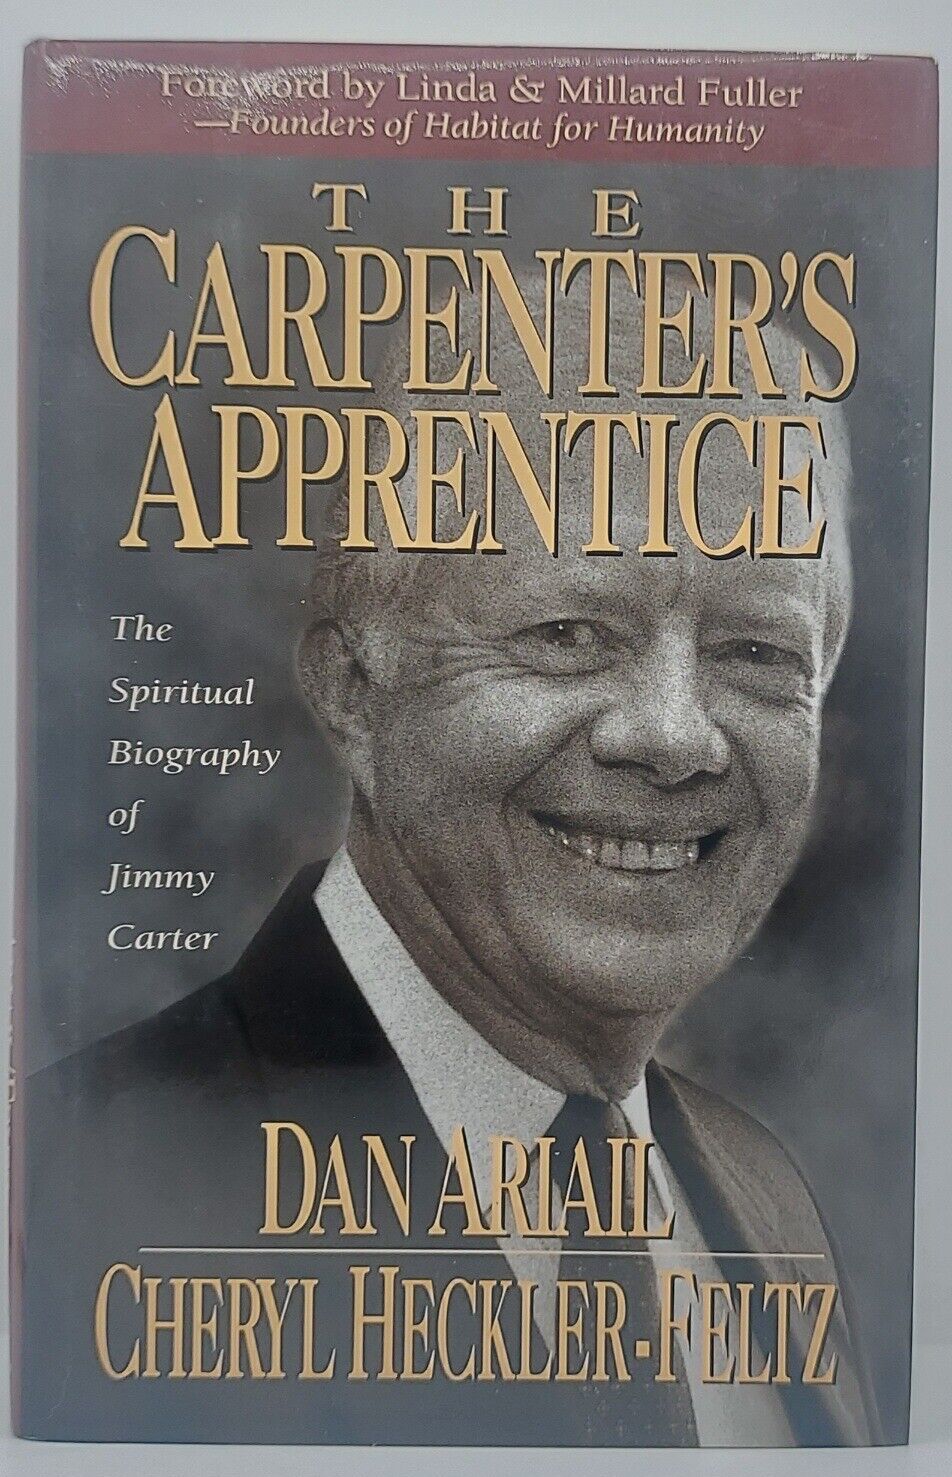 Rosalynn Carter Signed First Lady From Plains First Edition